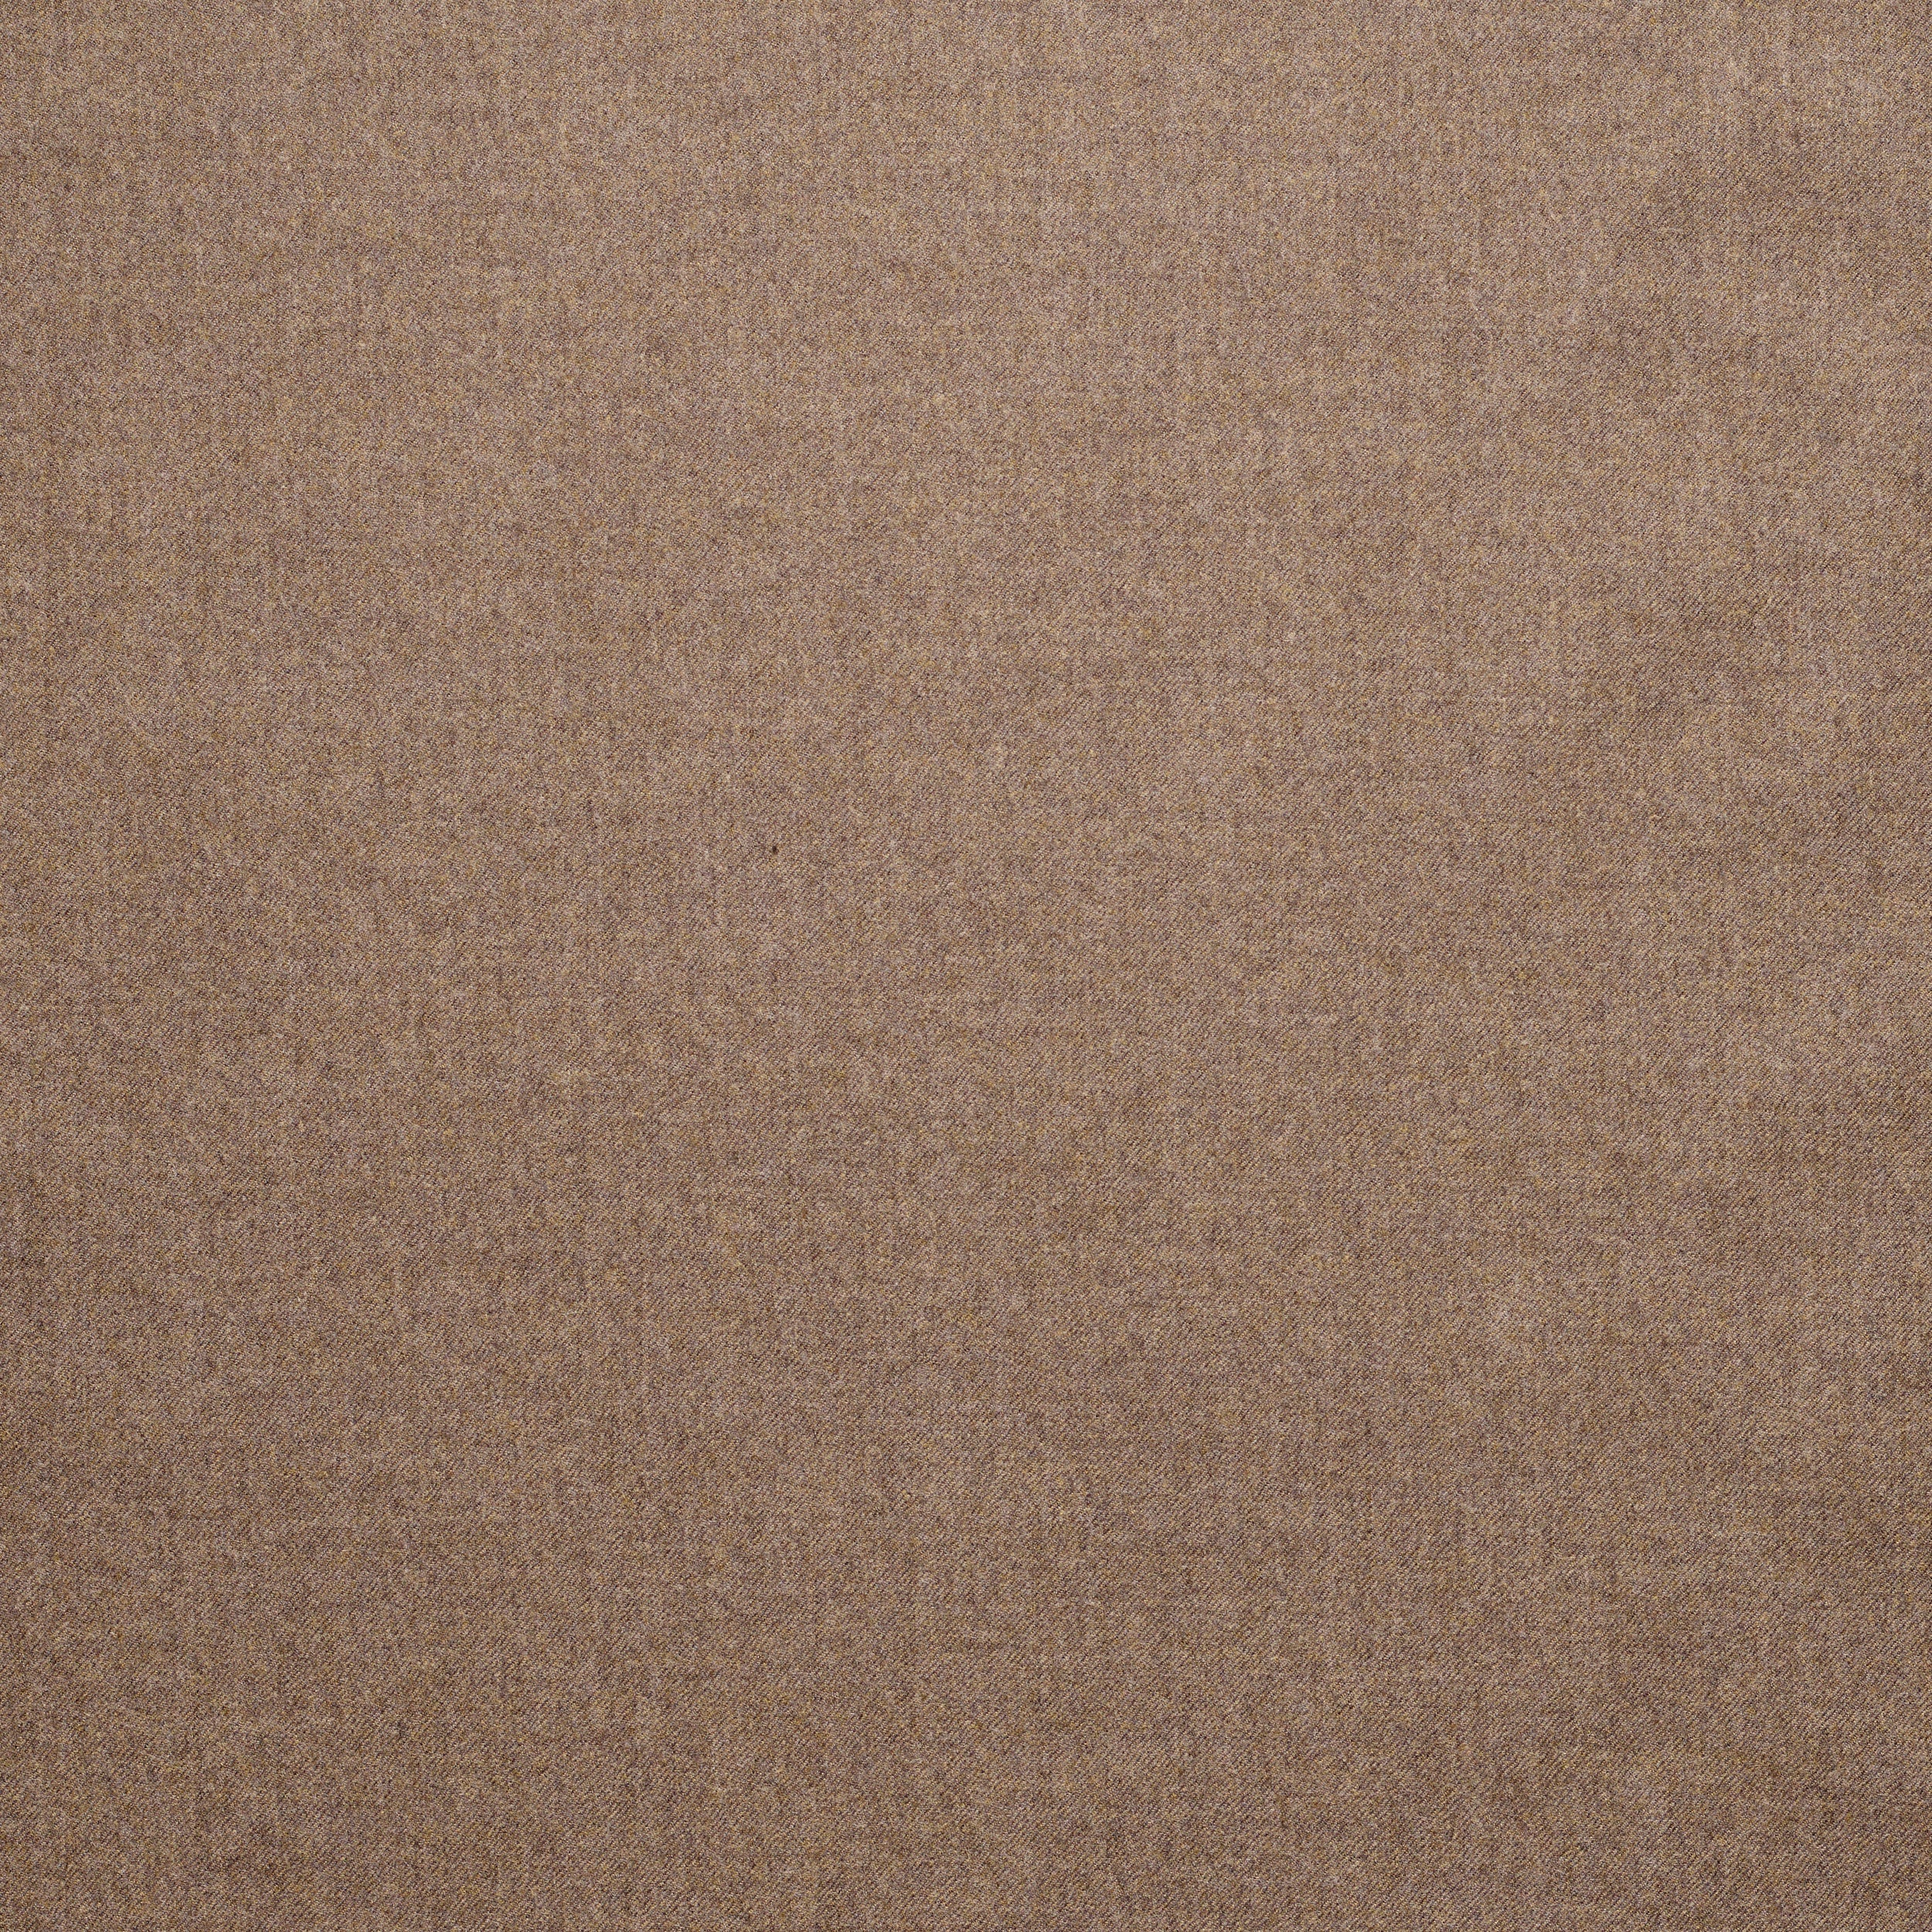 WF2-44 : Worsted Flannel Light Fawn Plain Mélange